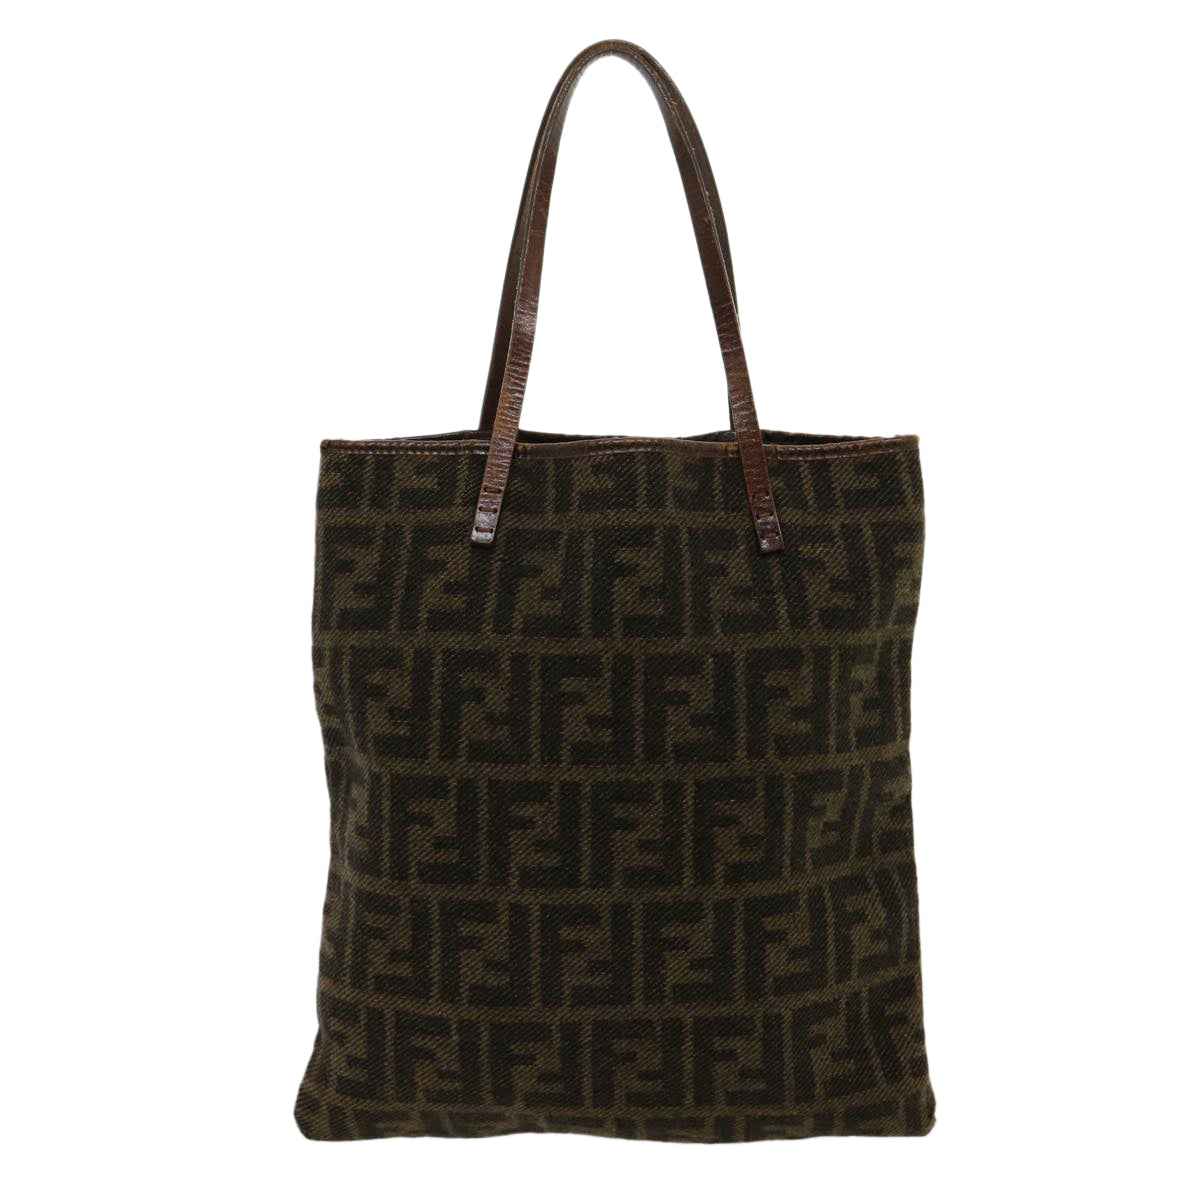 FENDI Zucca Canvas Tote Bag Wool Brown Auth am2733g - 0